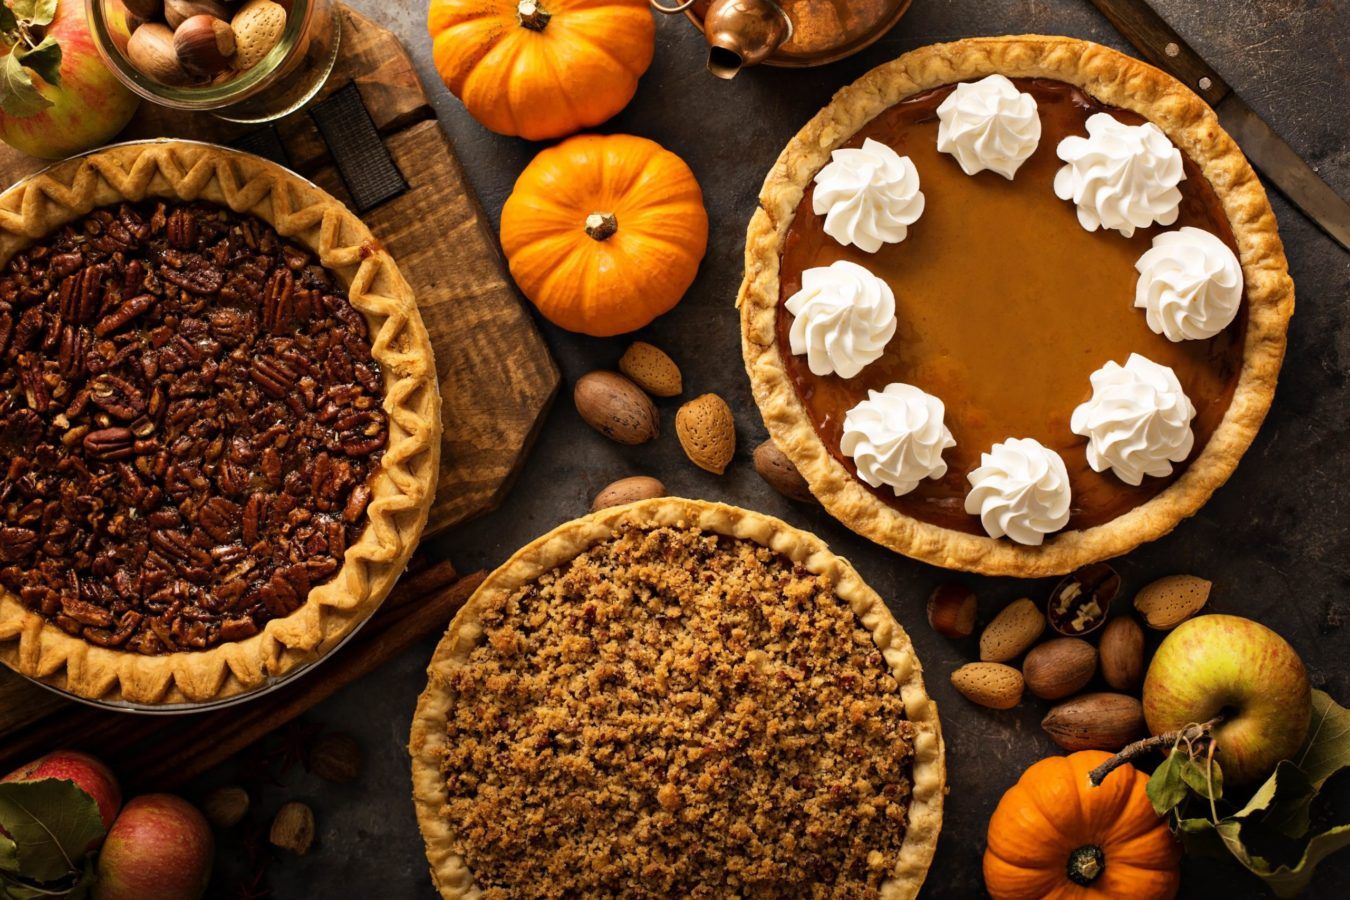 14 delicious pies to bake at home for the holidays